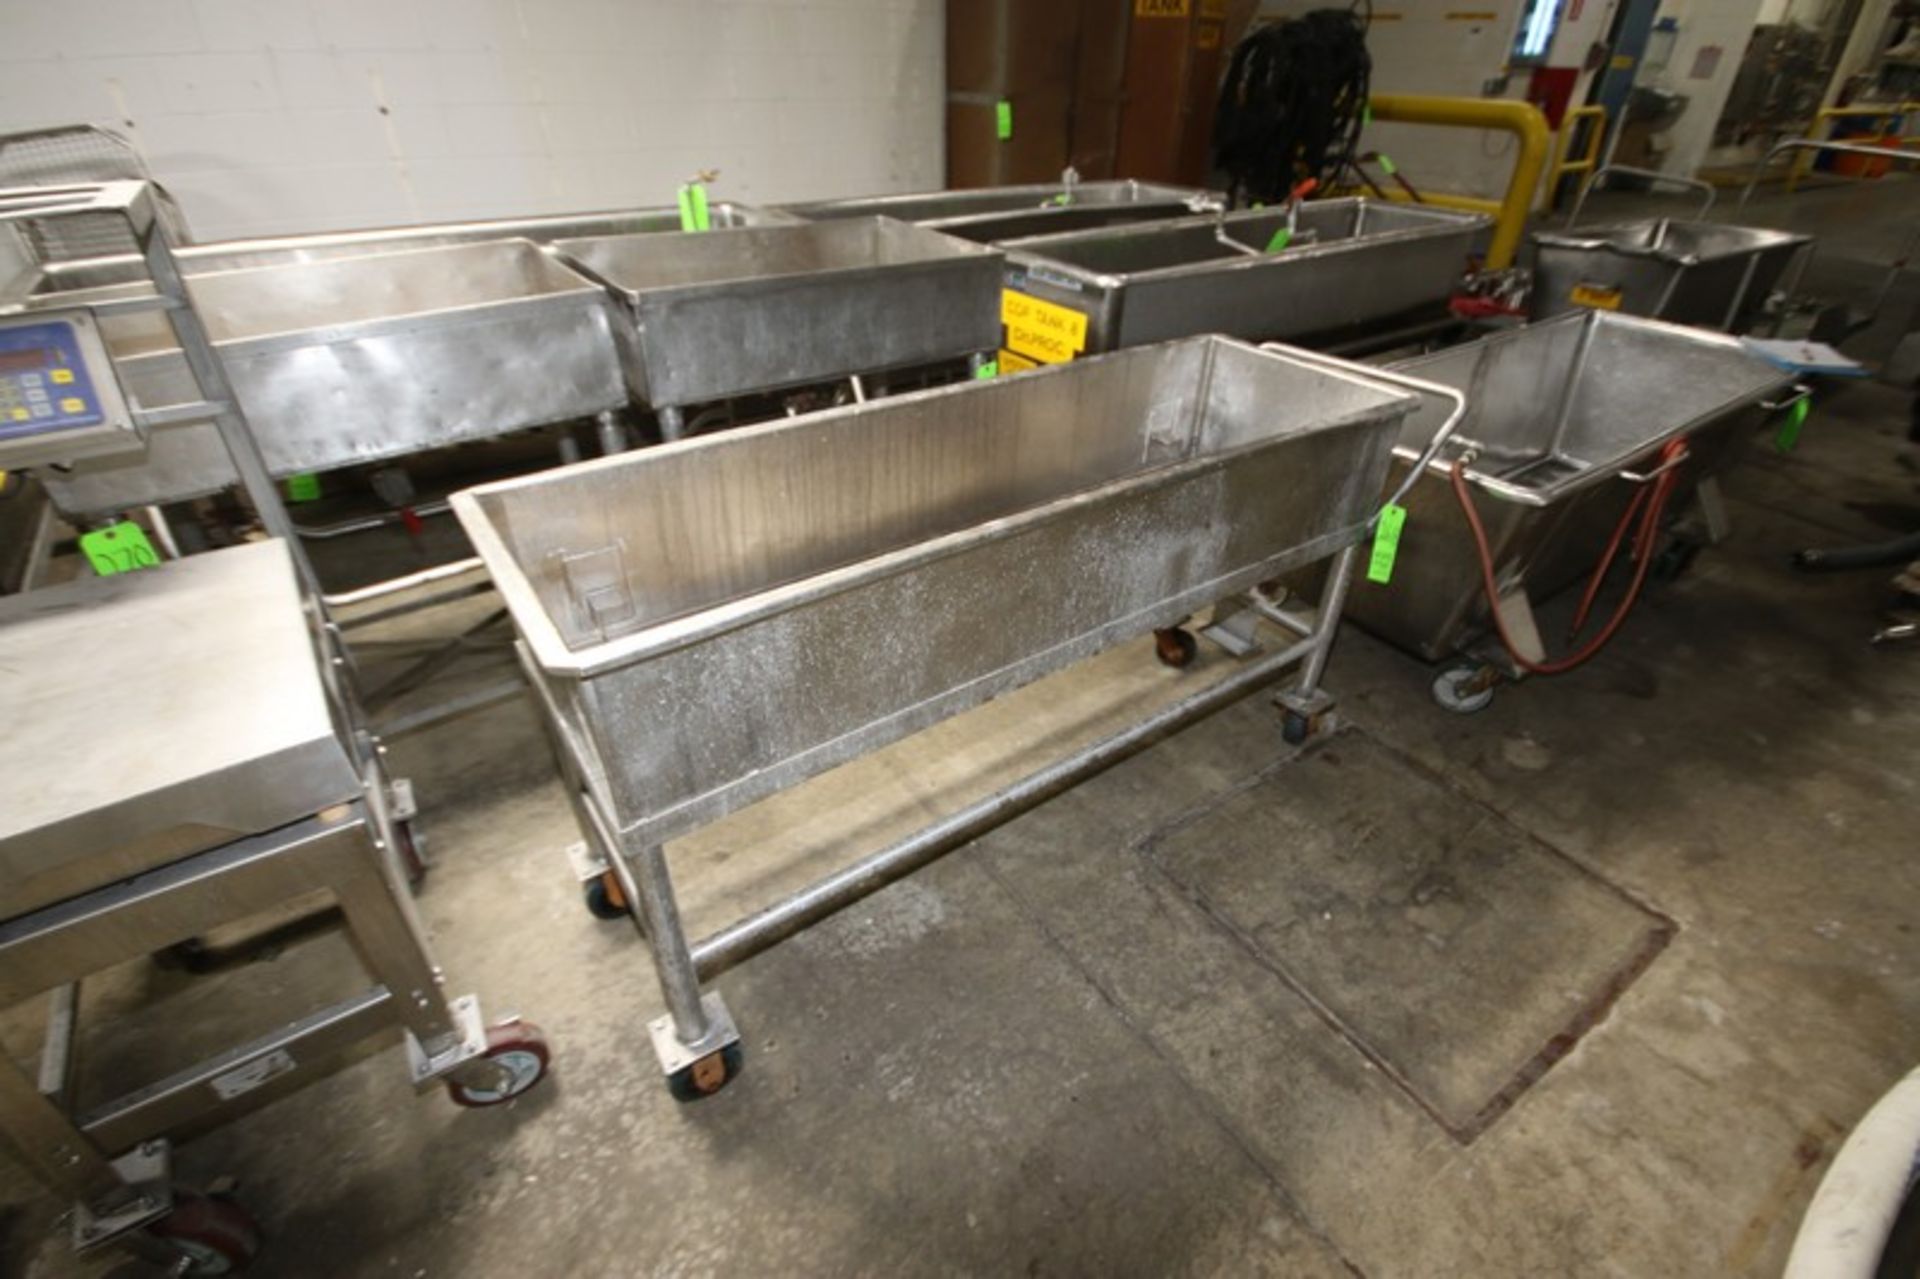 S/S Portable Trough, Internal Dims.: Aprox. 63-1/2" L x 19" W x 12" Deep, Mounted on S/S Portable - Image 2 of 3